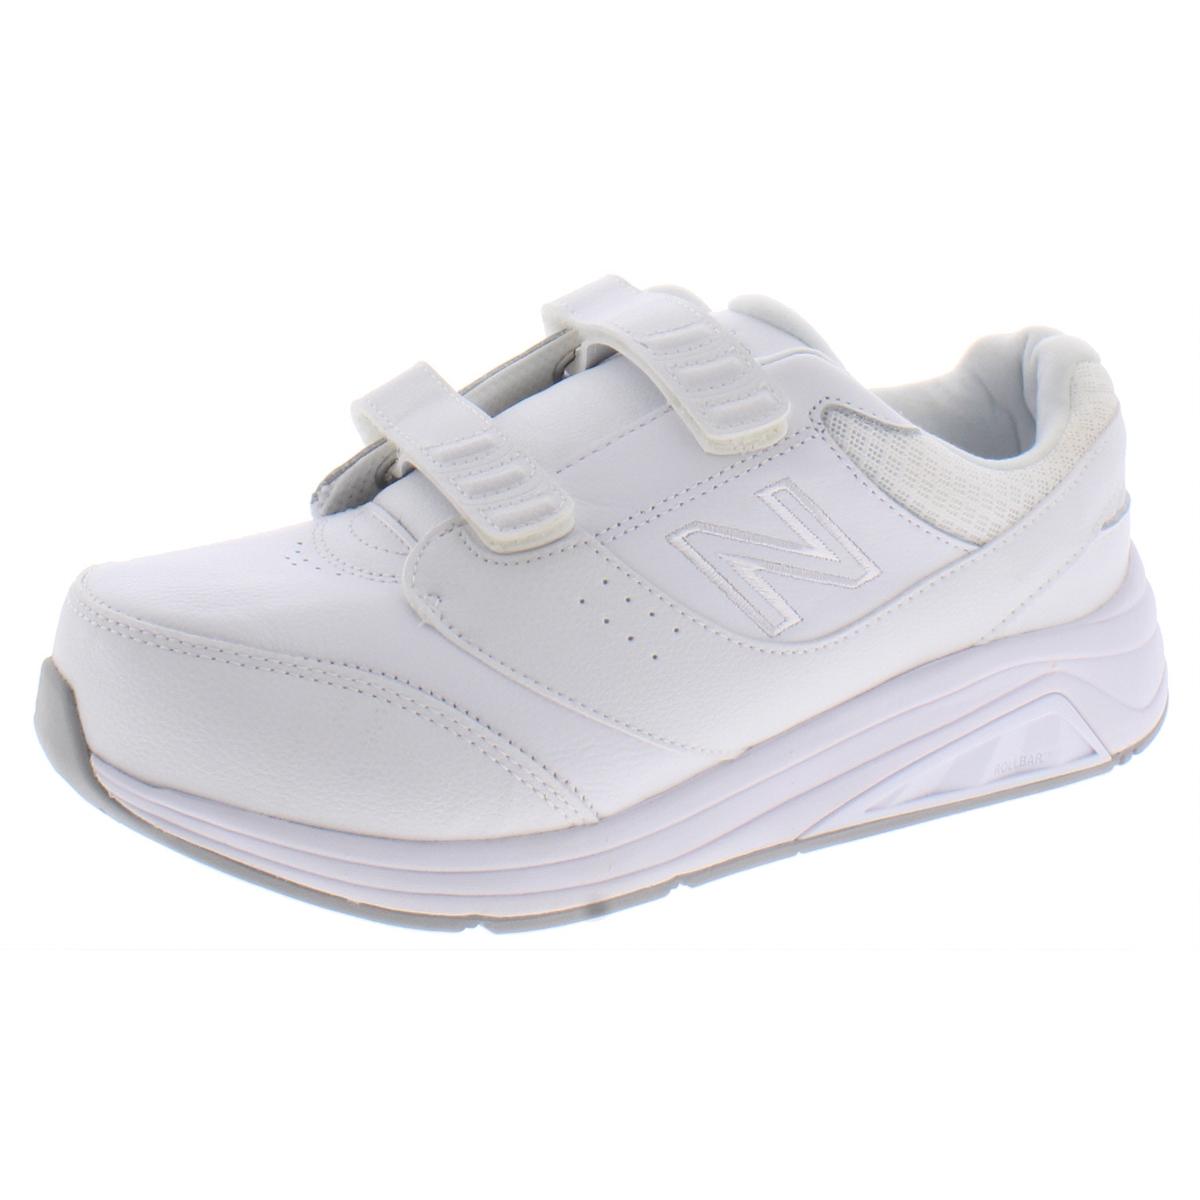 New Balance Womens 928v3 White Walking Shoes Sneakers 9.5 XXWide (4E ...